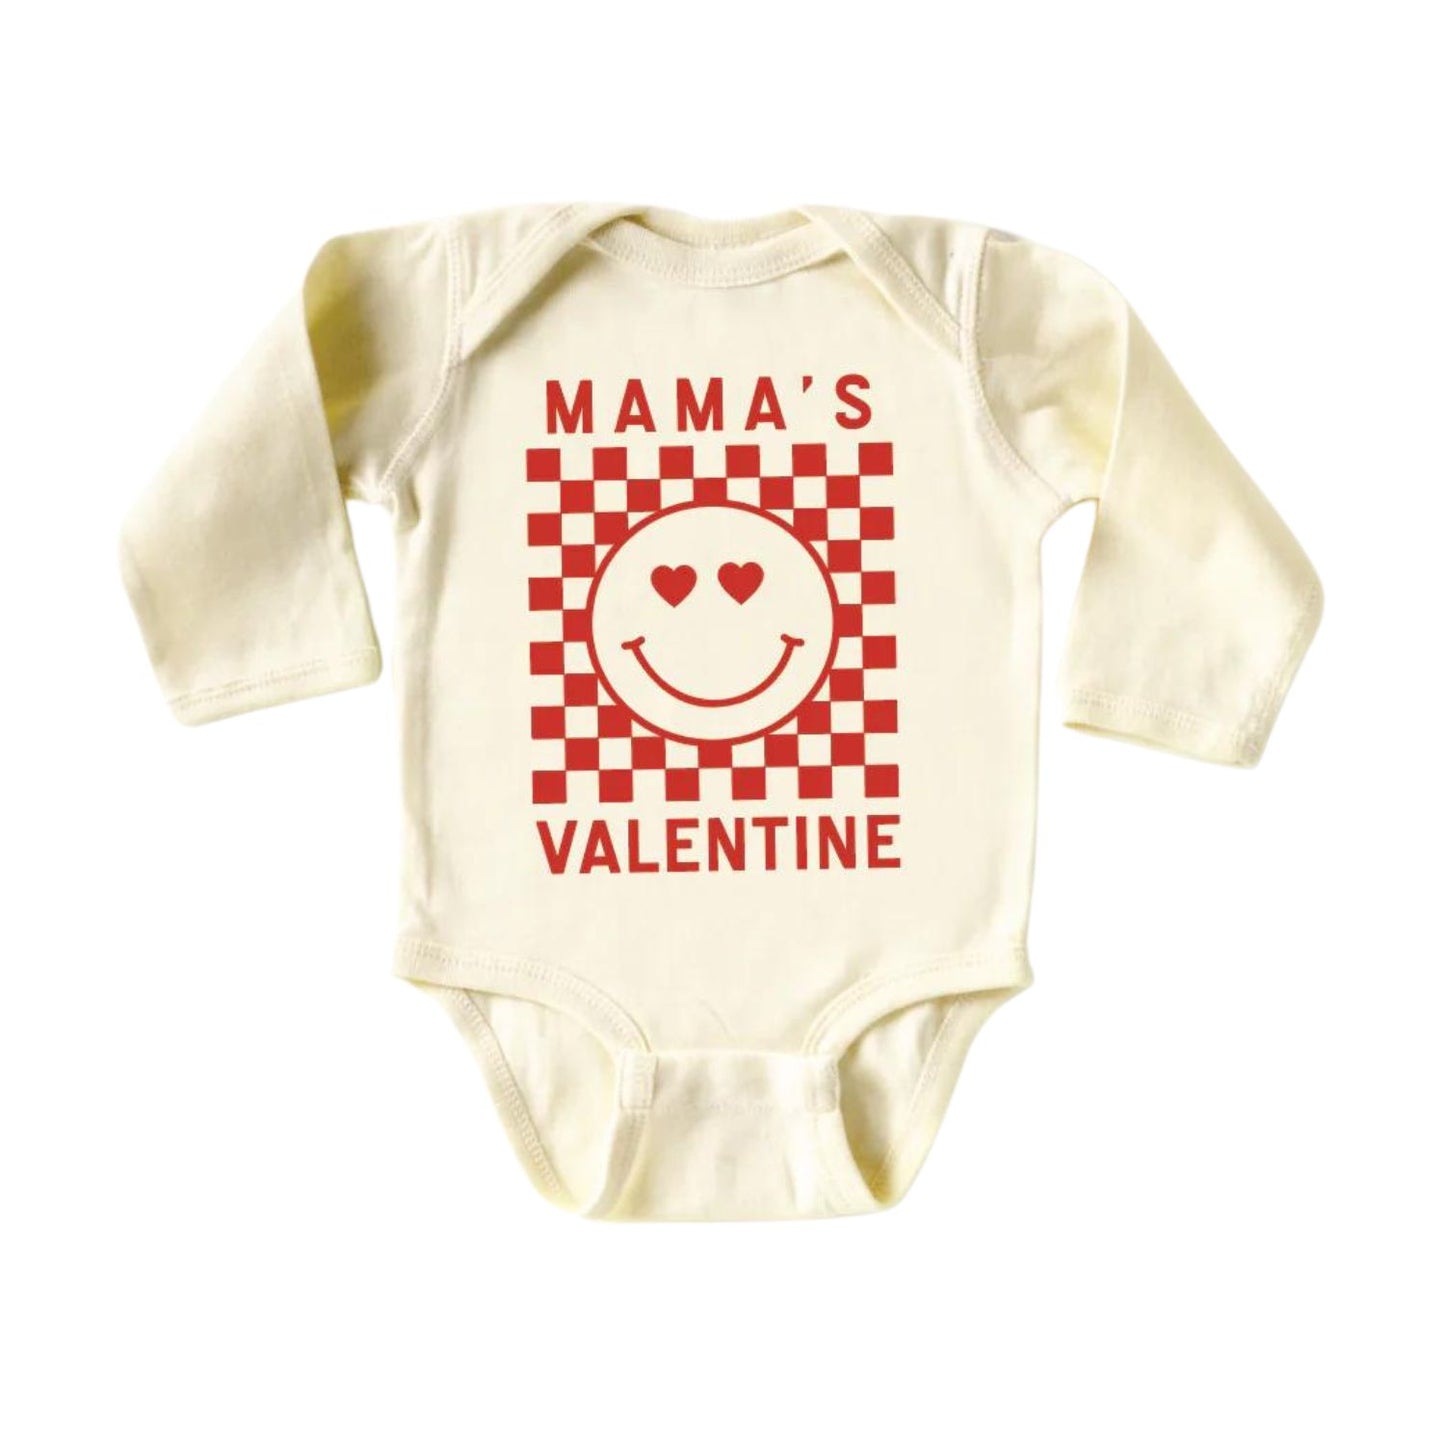 Checkered Long Sleeved Onesie - Mama's Valentine - Natural - SBGC - FINAL SALE